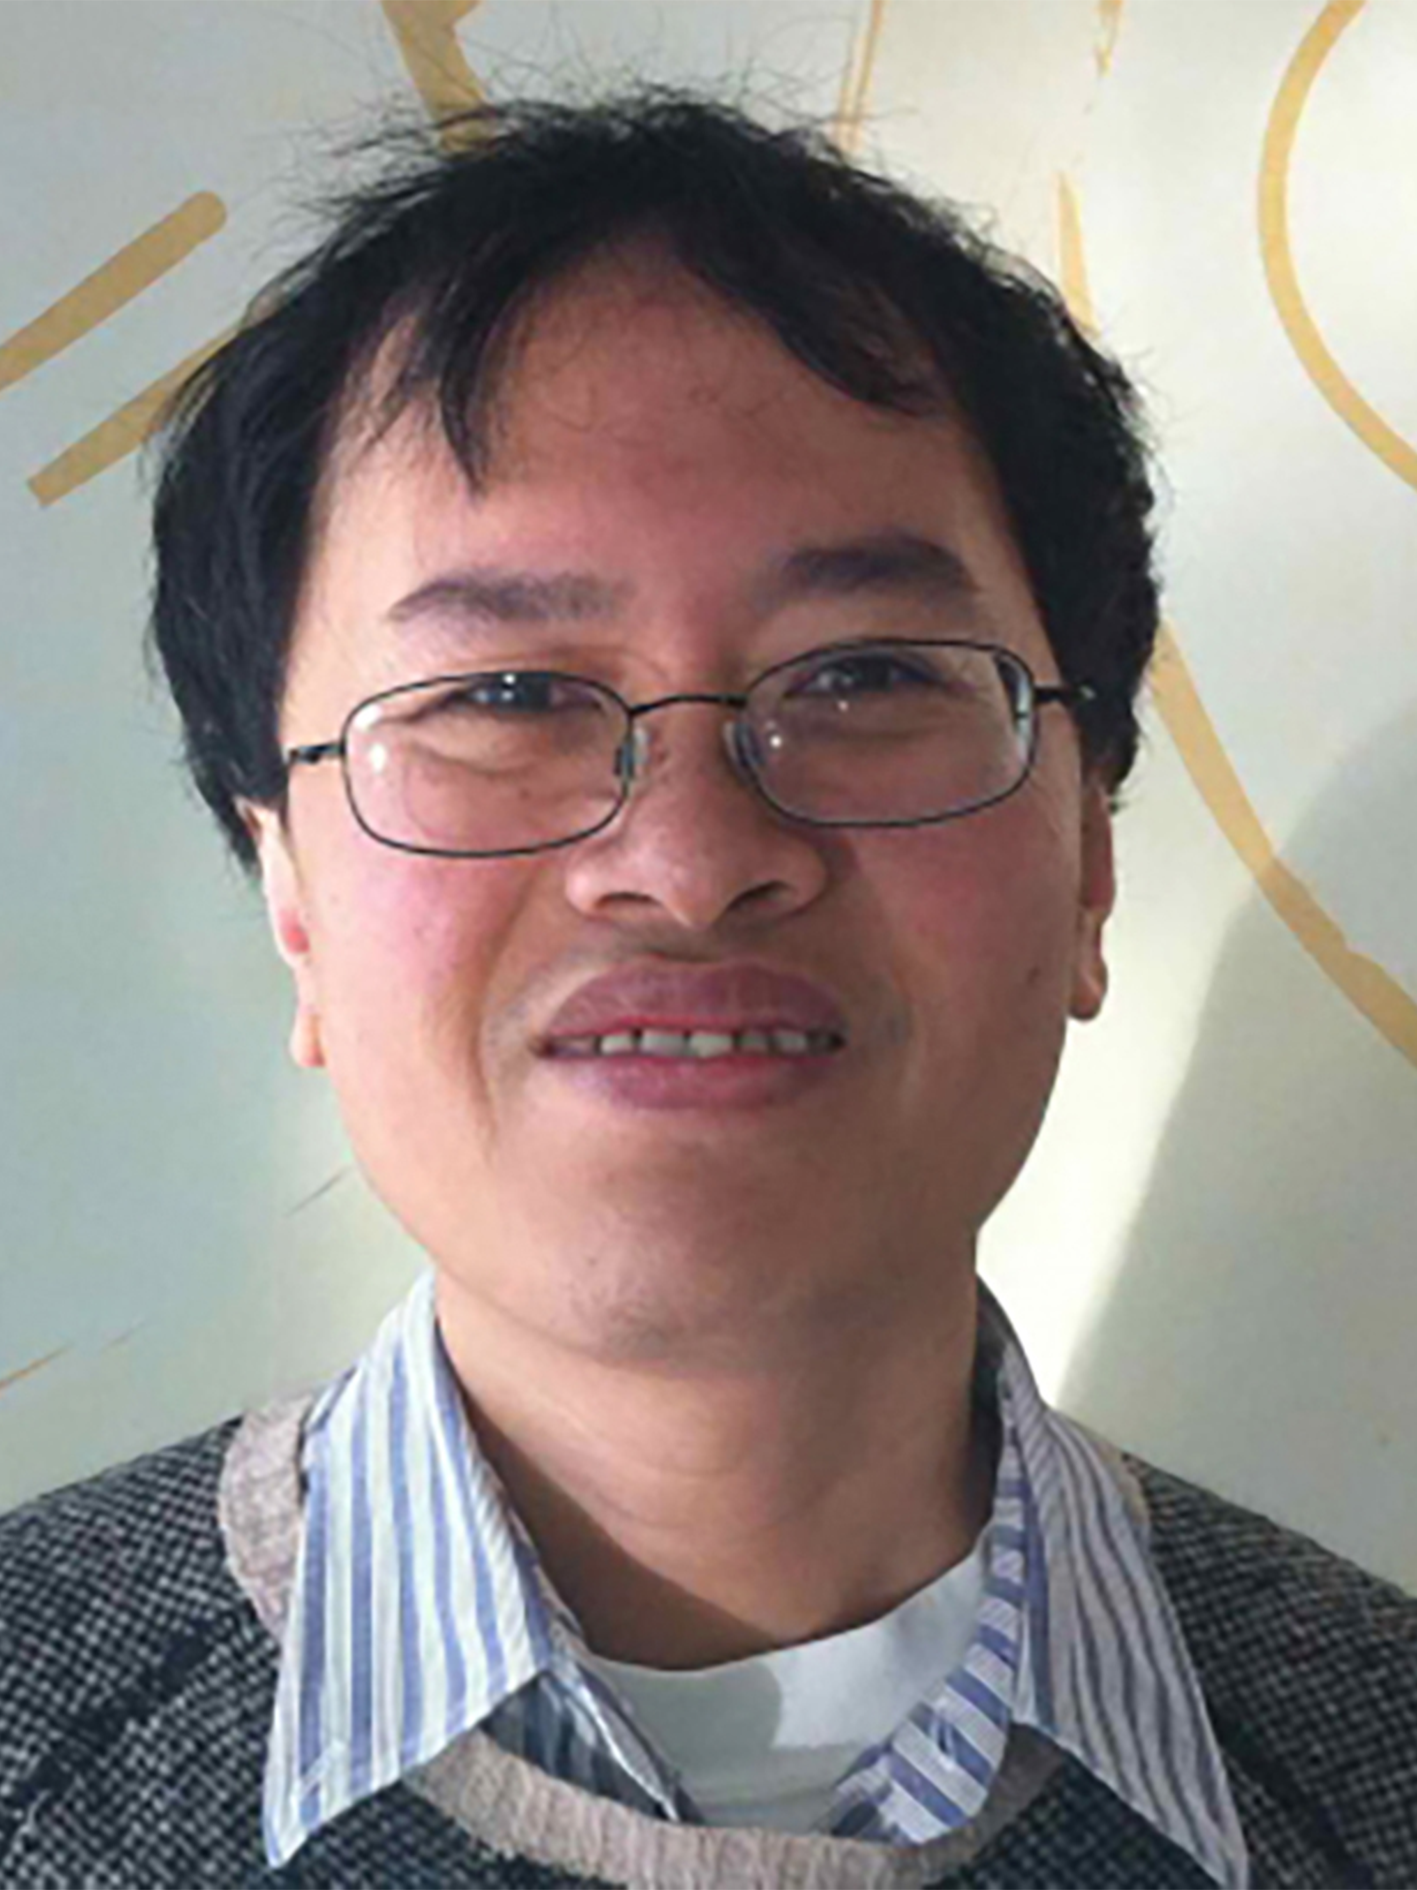 Dam Thanh Son, Professor at the University of Chicago, Distinguished Visiting Research Chair at Perimeter